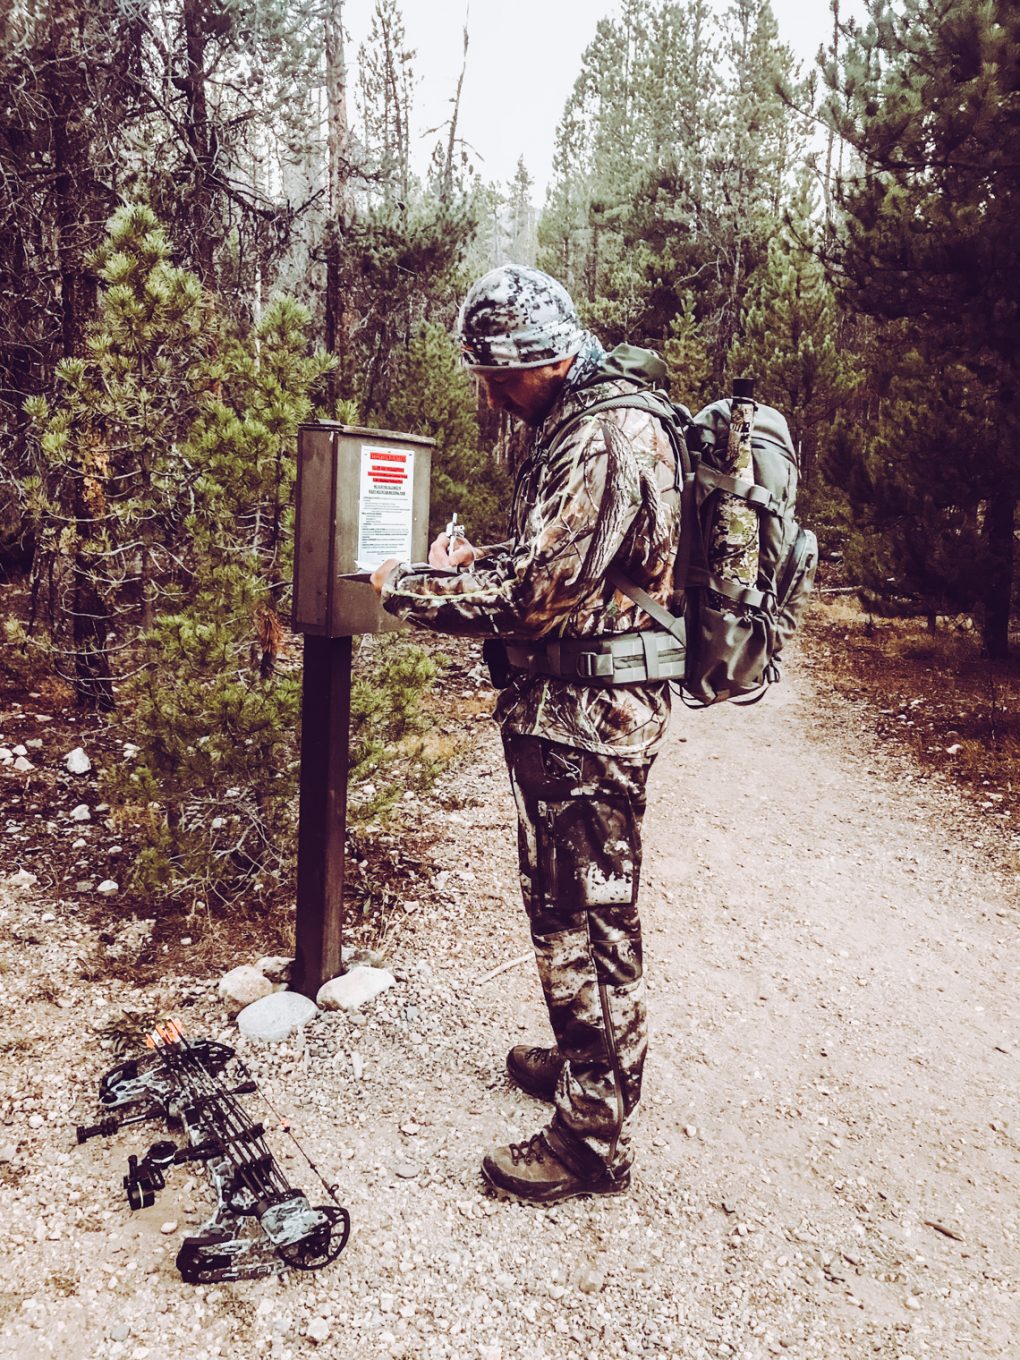 Mike signing in on the required document for public land hunting in Colorado